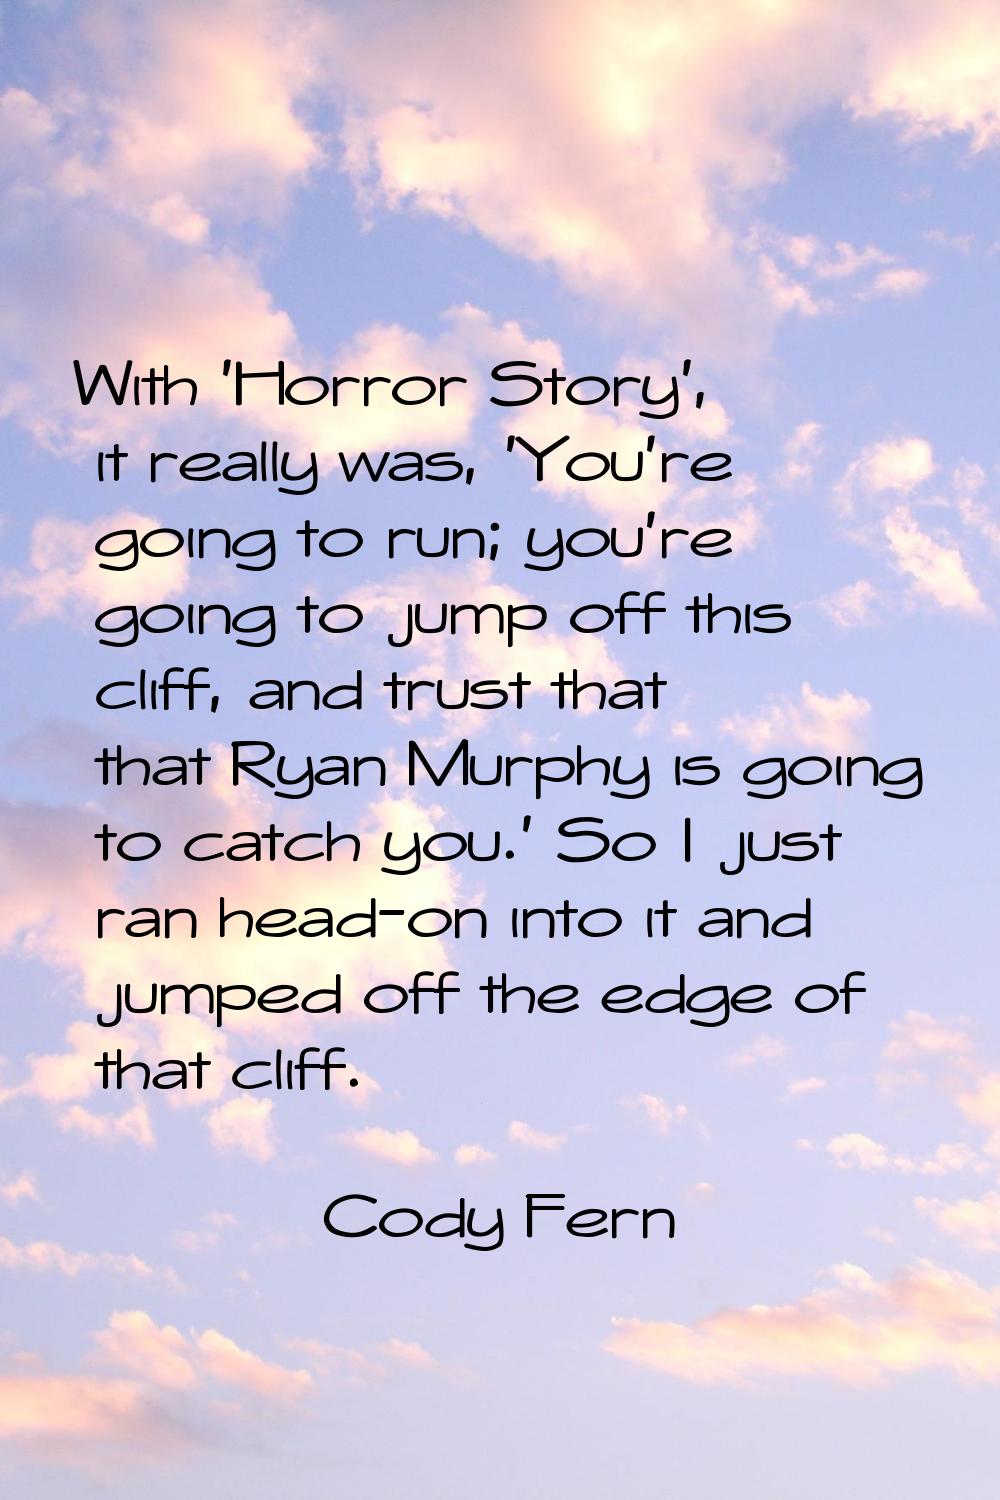 With 'Horror Story', it really was, 'You're going to run; you're going to jump off this cliff, and 